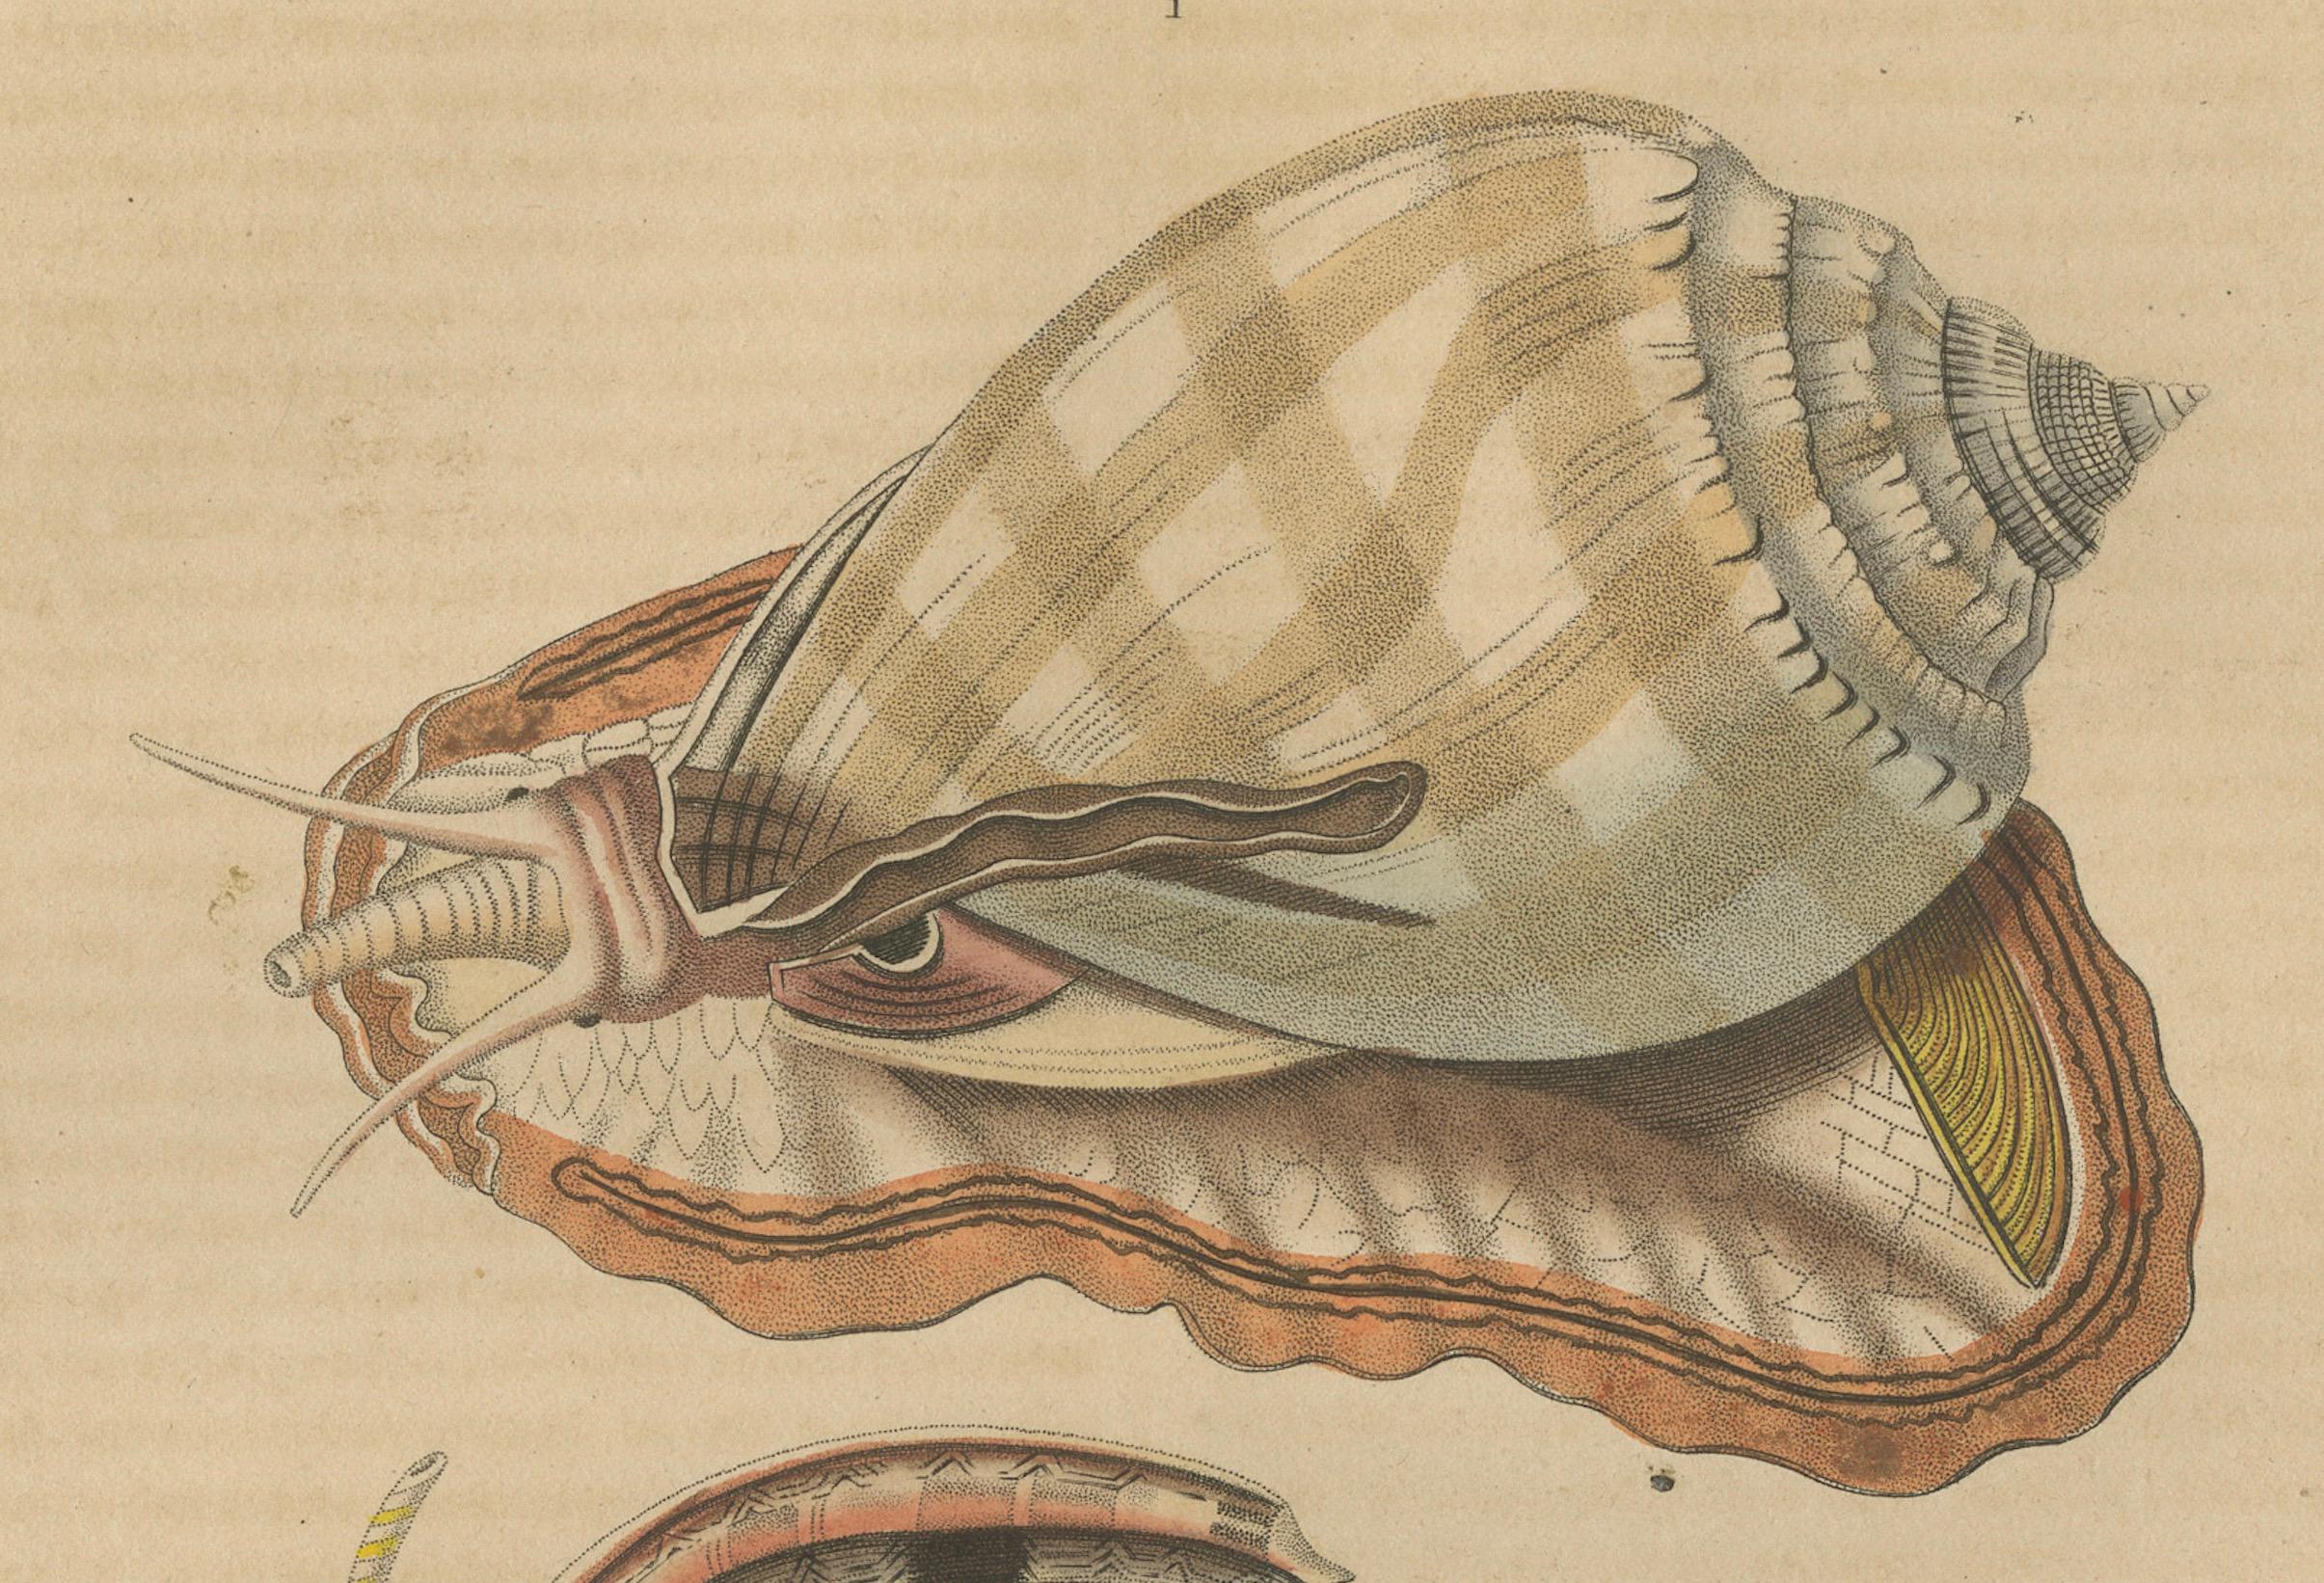 Mid-19th Century pirals of the Sea: Artistic Renderings of 19th Century Gastropods, 1845 For Sale